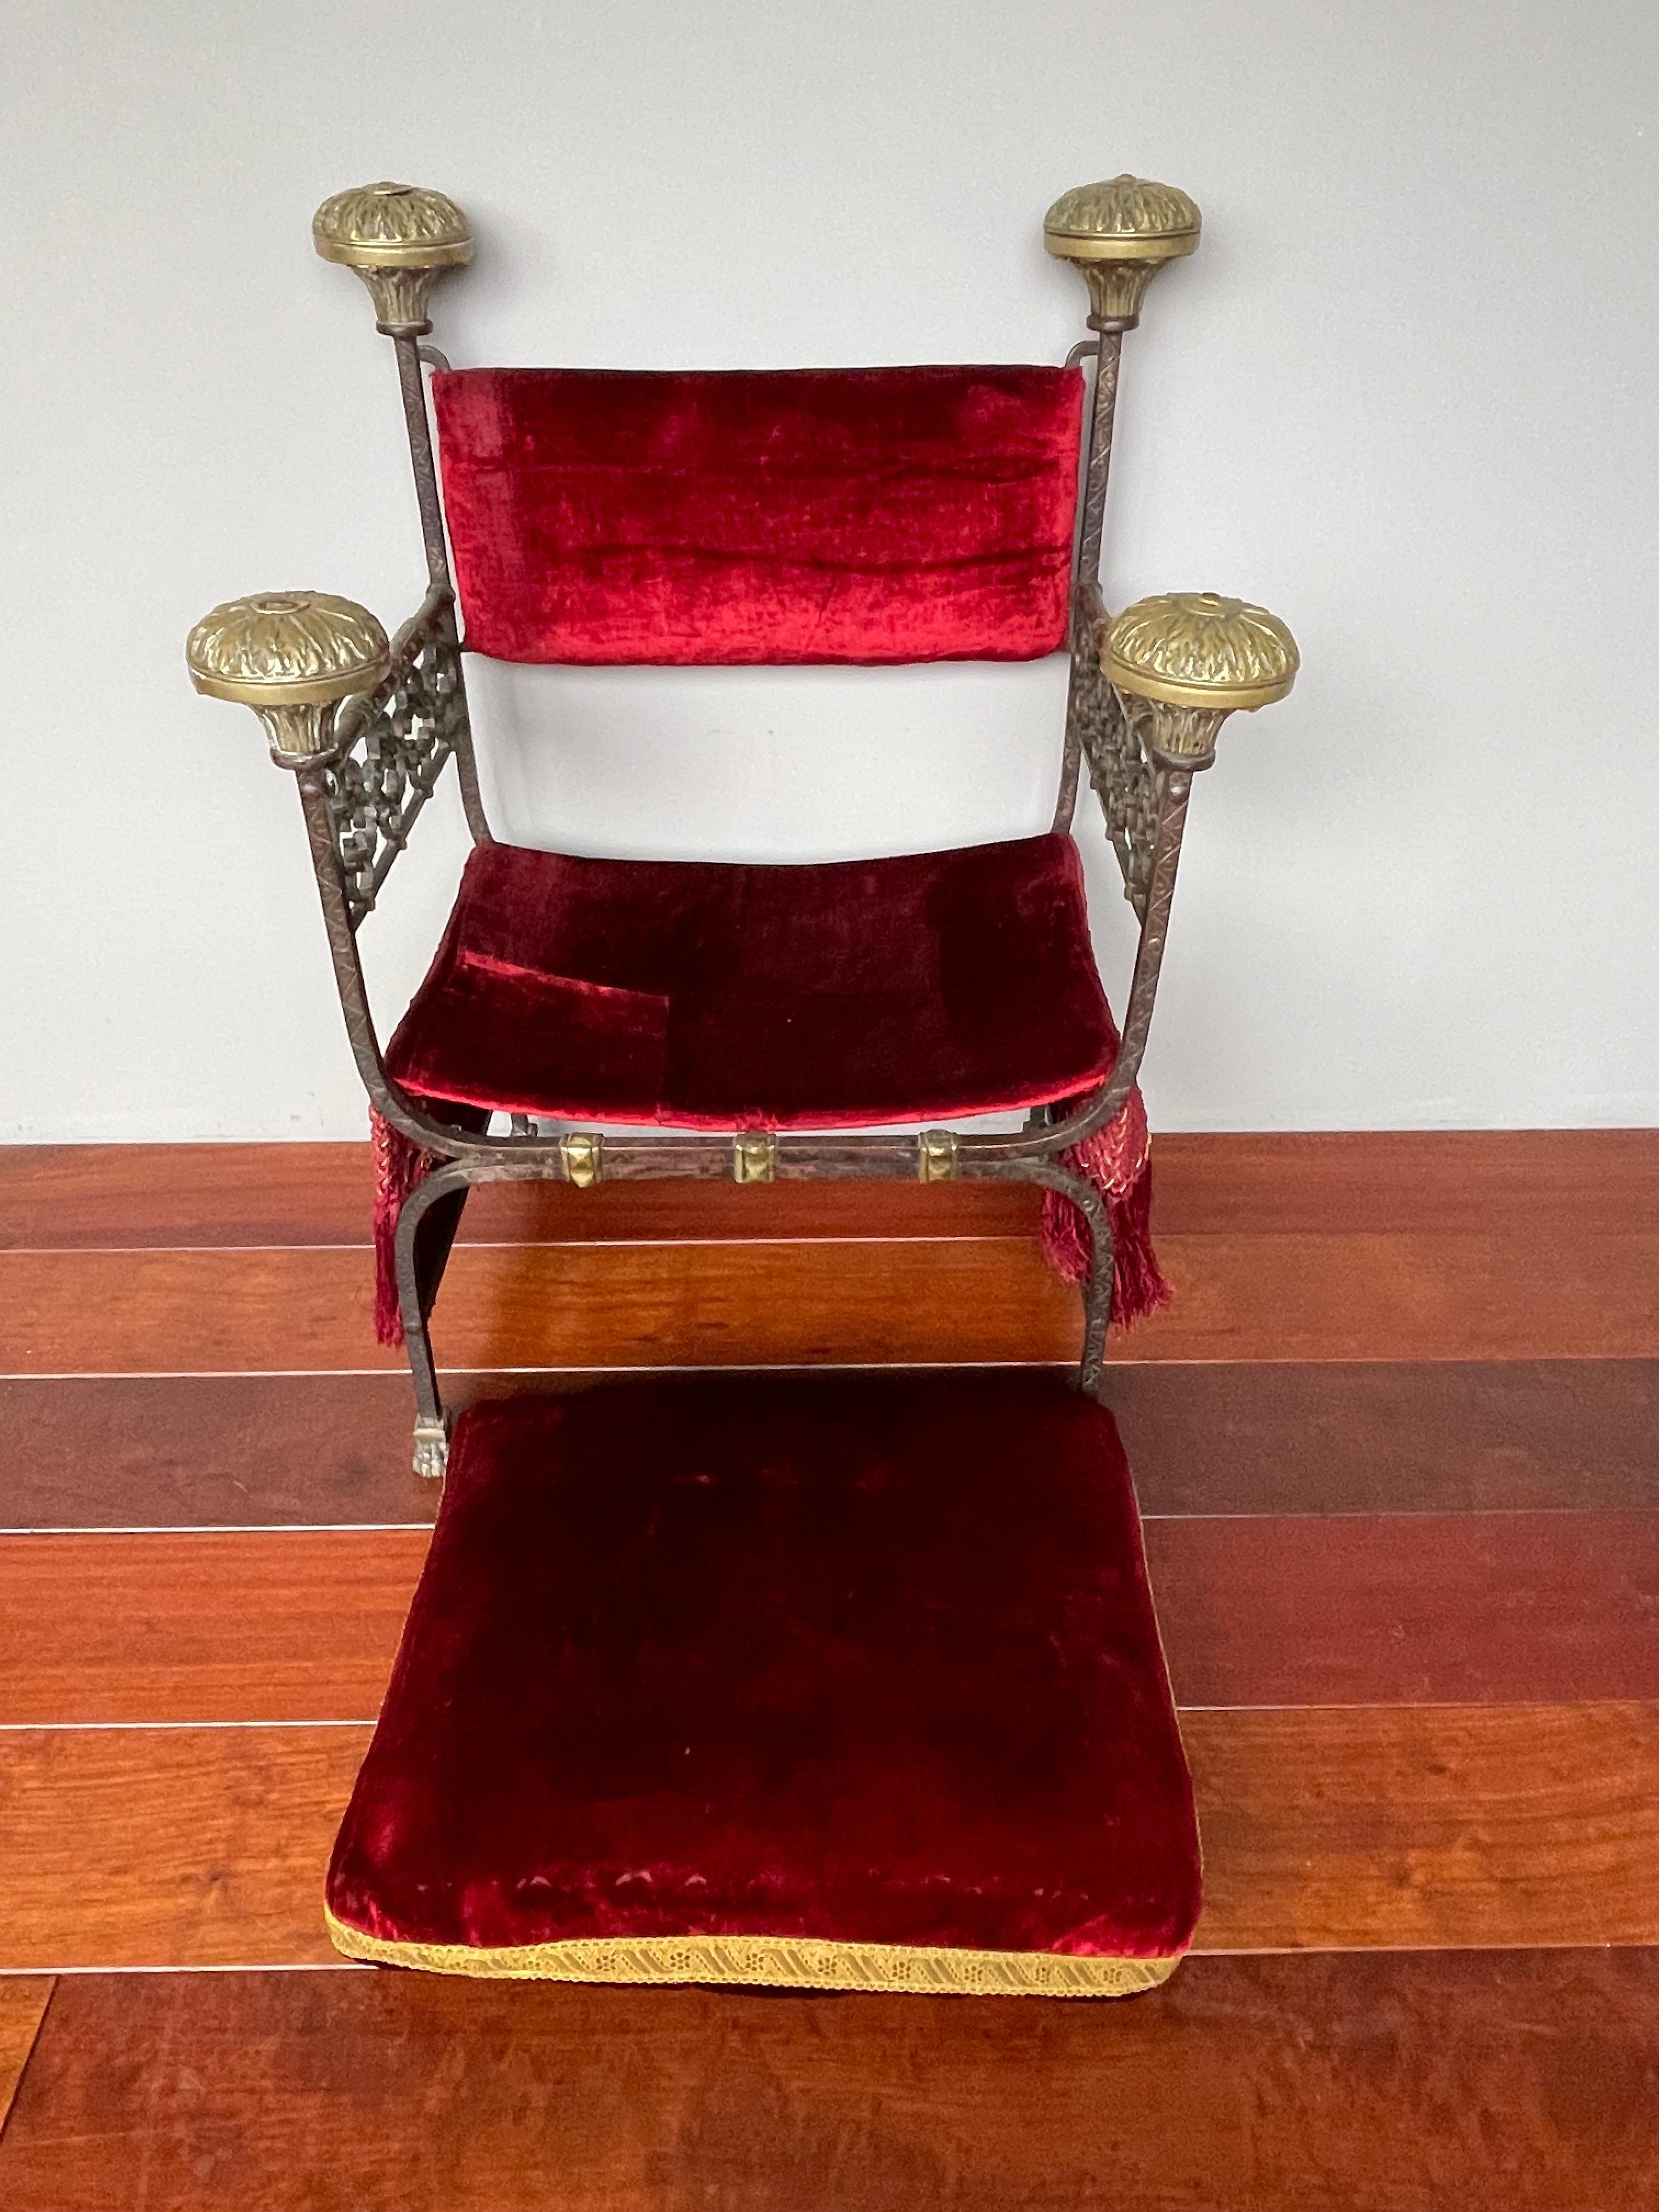 Antique & Stunning Wrought Iron & Bronze Gothic Castle Chair w. Scarlet Red Seat 13